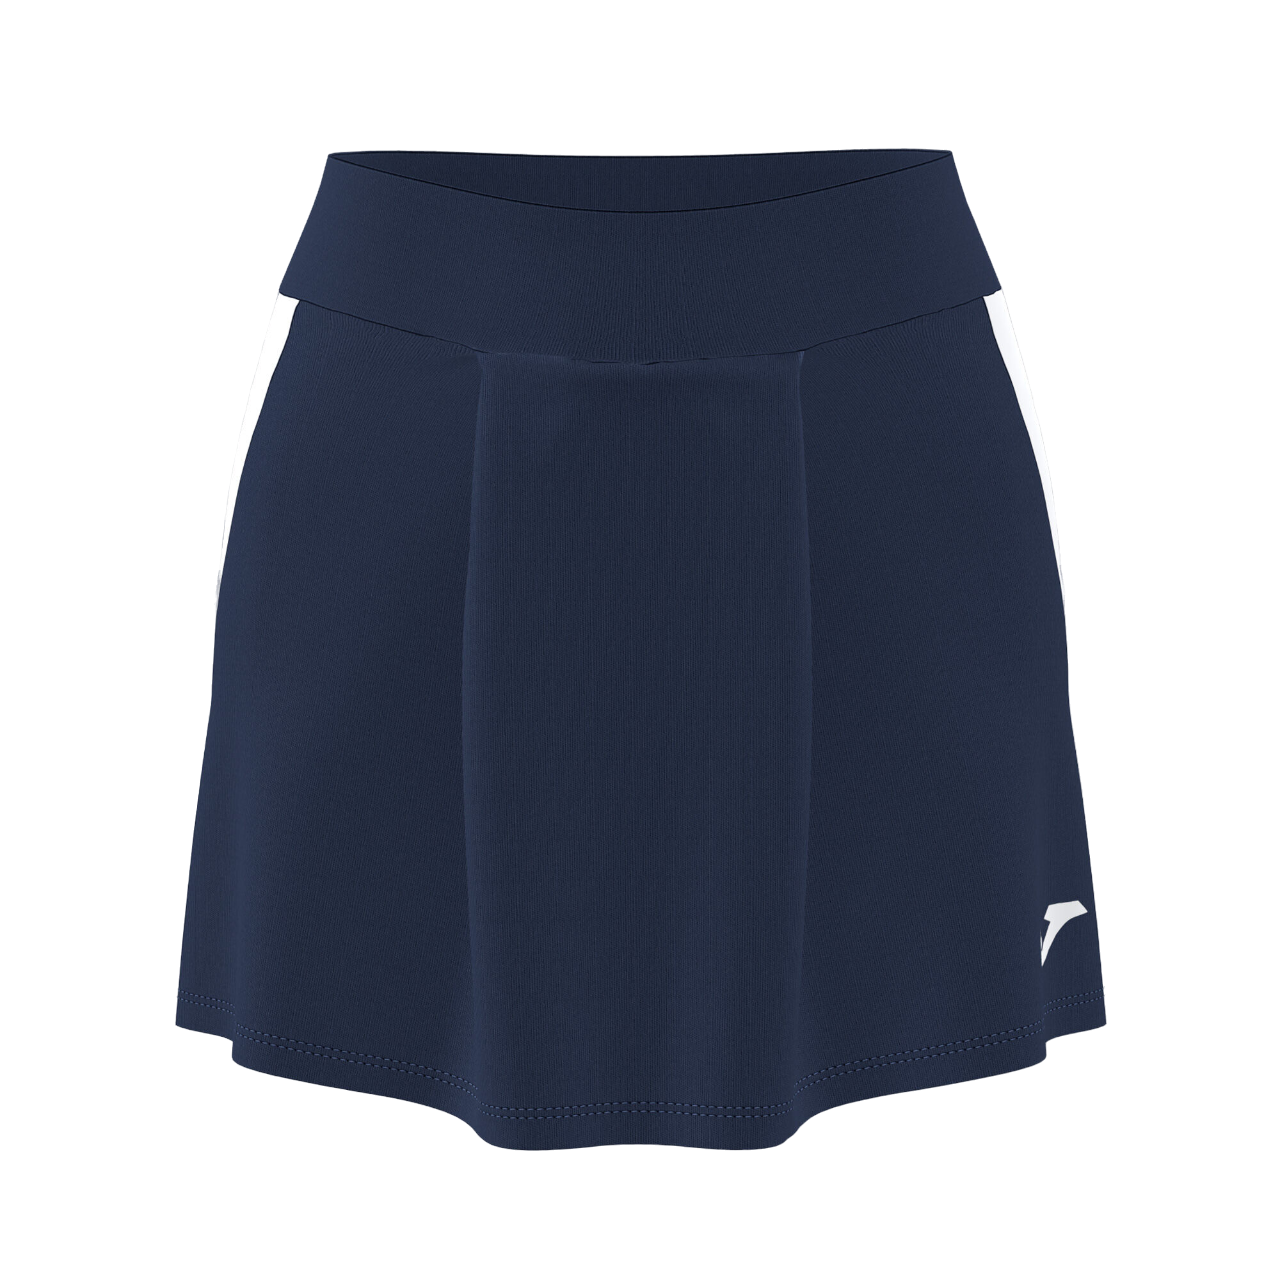 Joma Sports skirt for tennis and padel with shorts and ball pockets Tournament Skirt 901295.332 navy-white 